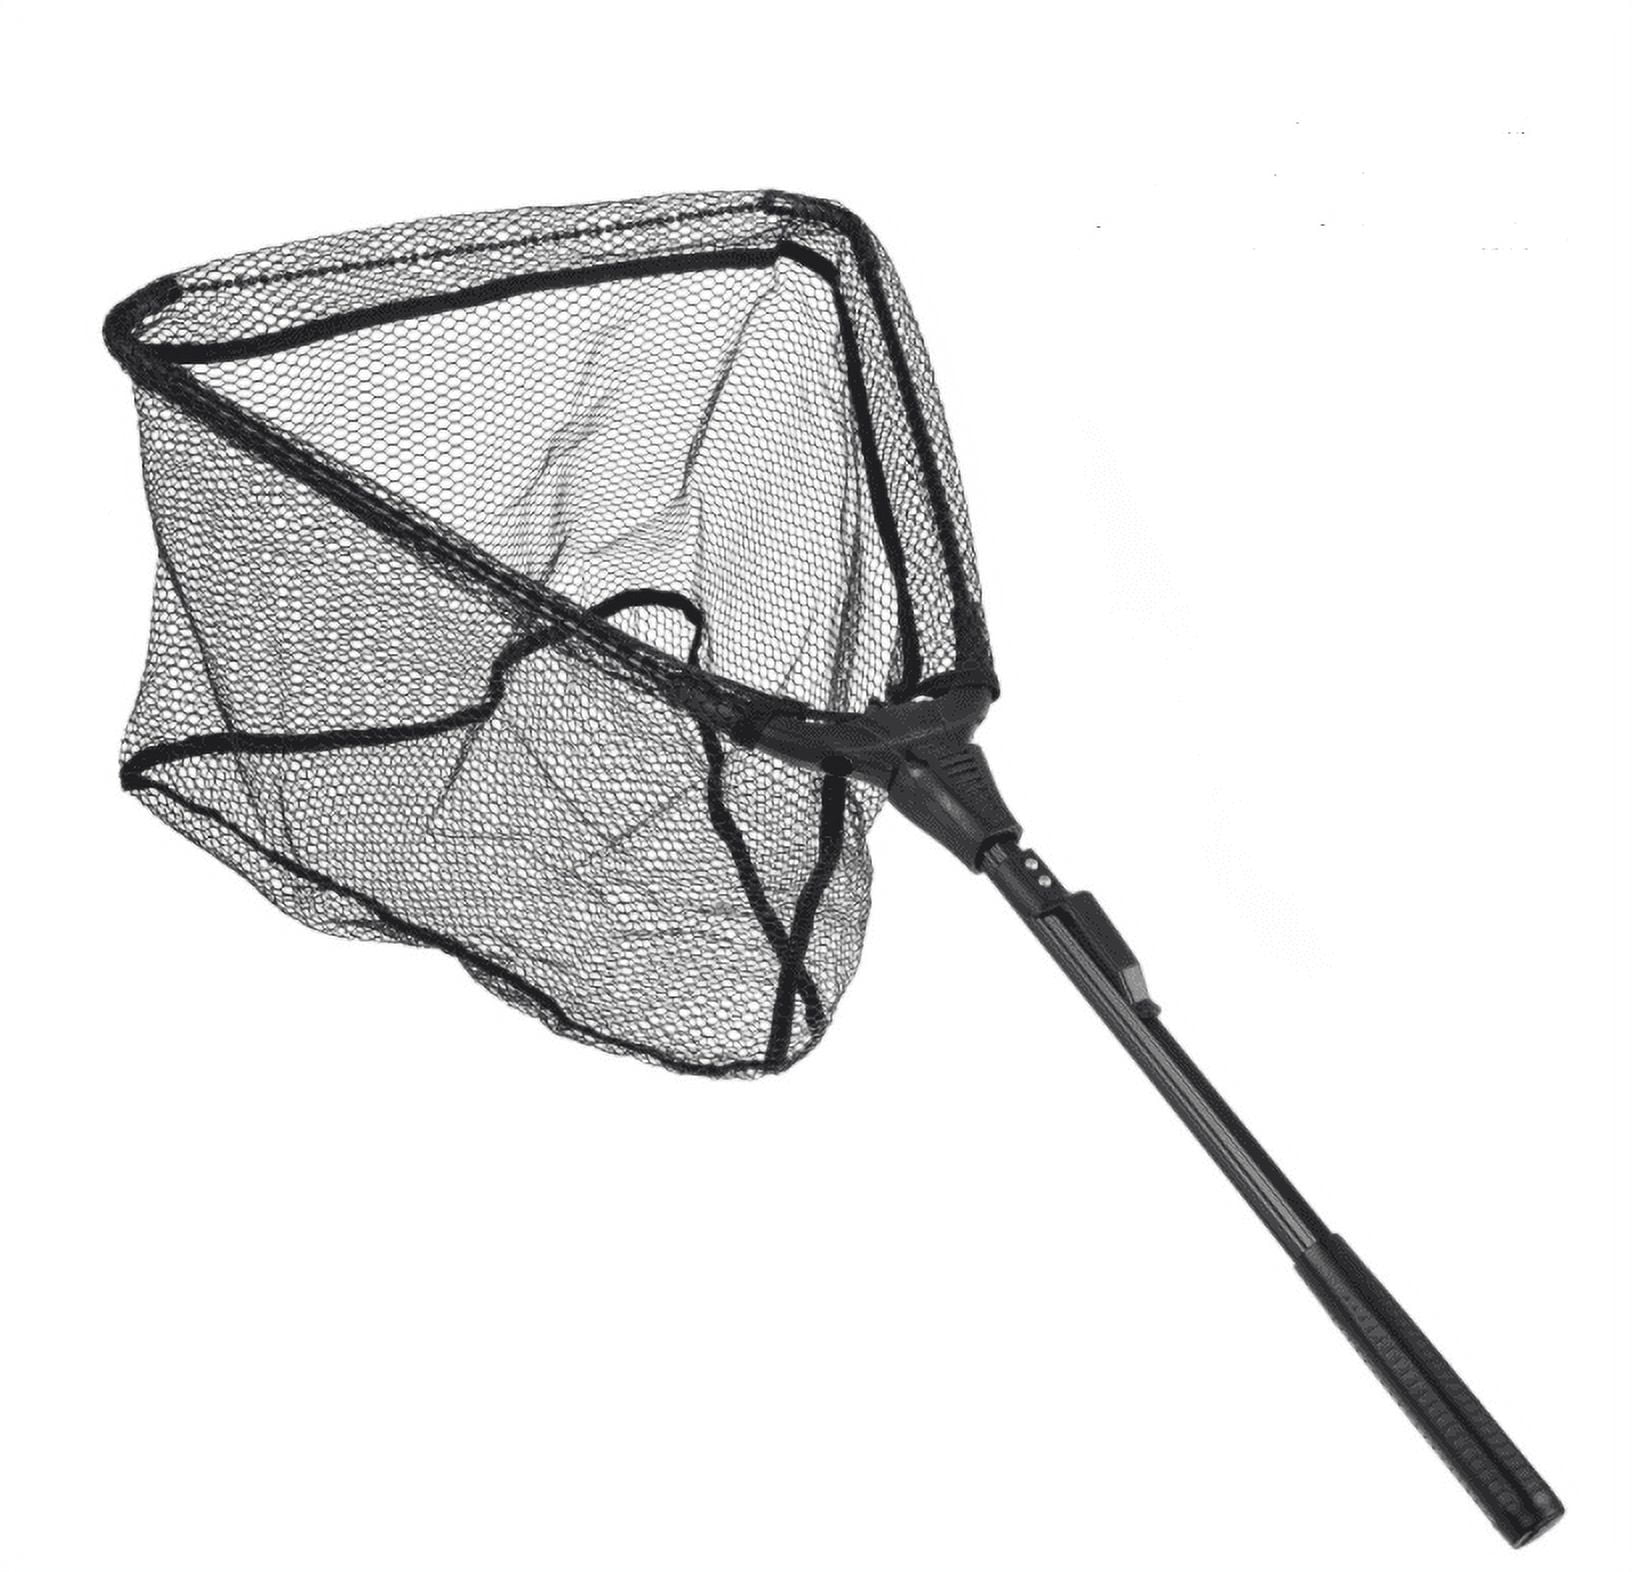 Generic Floating Fishing Net For Salmon, Fly, Kayak, Catfish, Bass, Trout @  Best Price Online